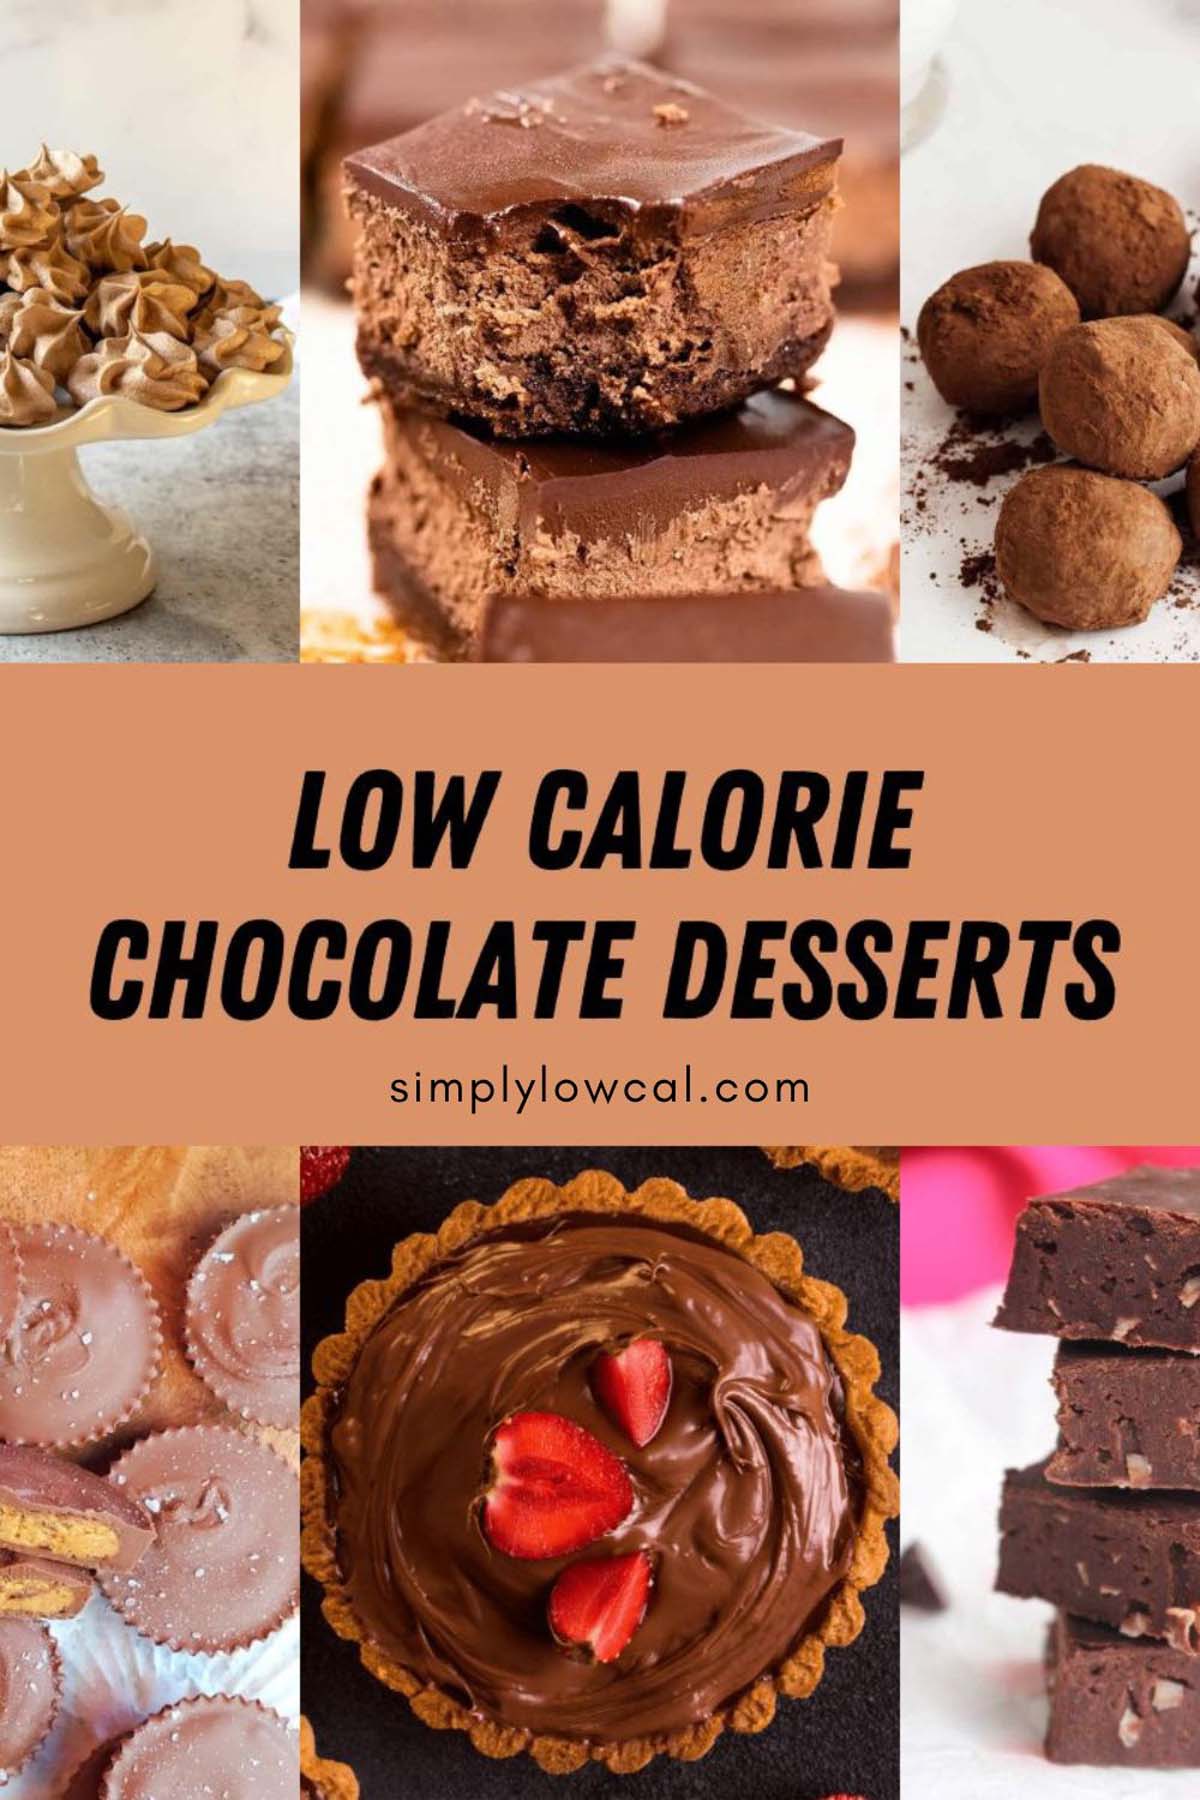 Pinterest pin of low calorie chocolate desserts.